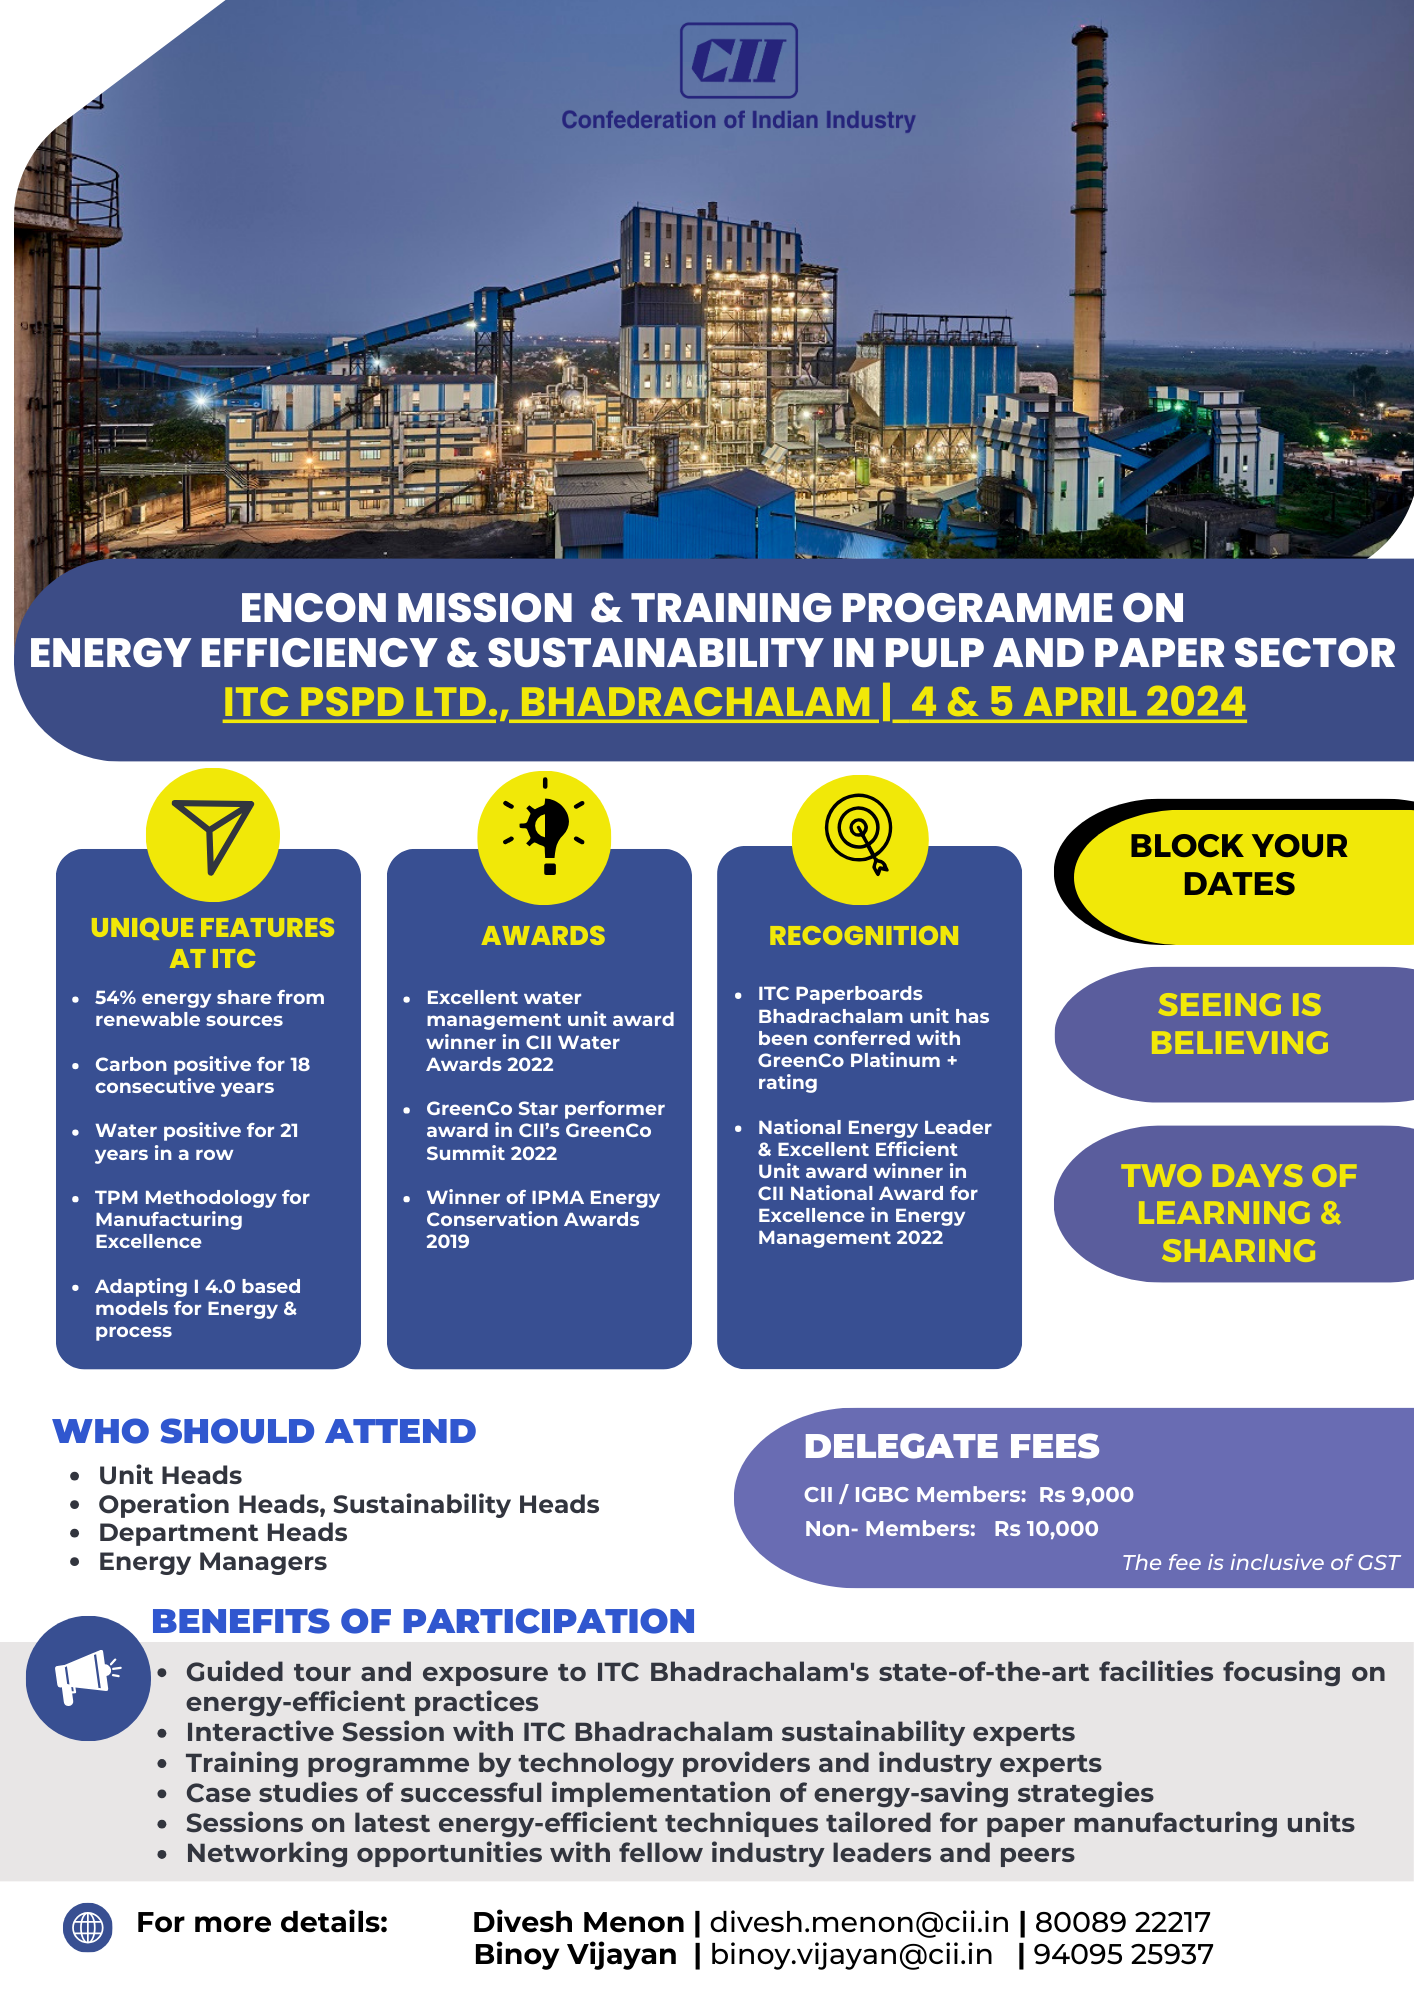 ENCON MISSION & TRAINING PROGRAMME ON ENERGY EFFICIENCY & SUSTAINABLE IN PULP AND PAPER SECTOR